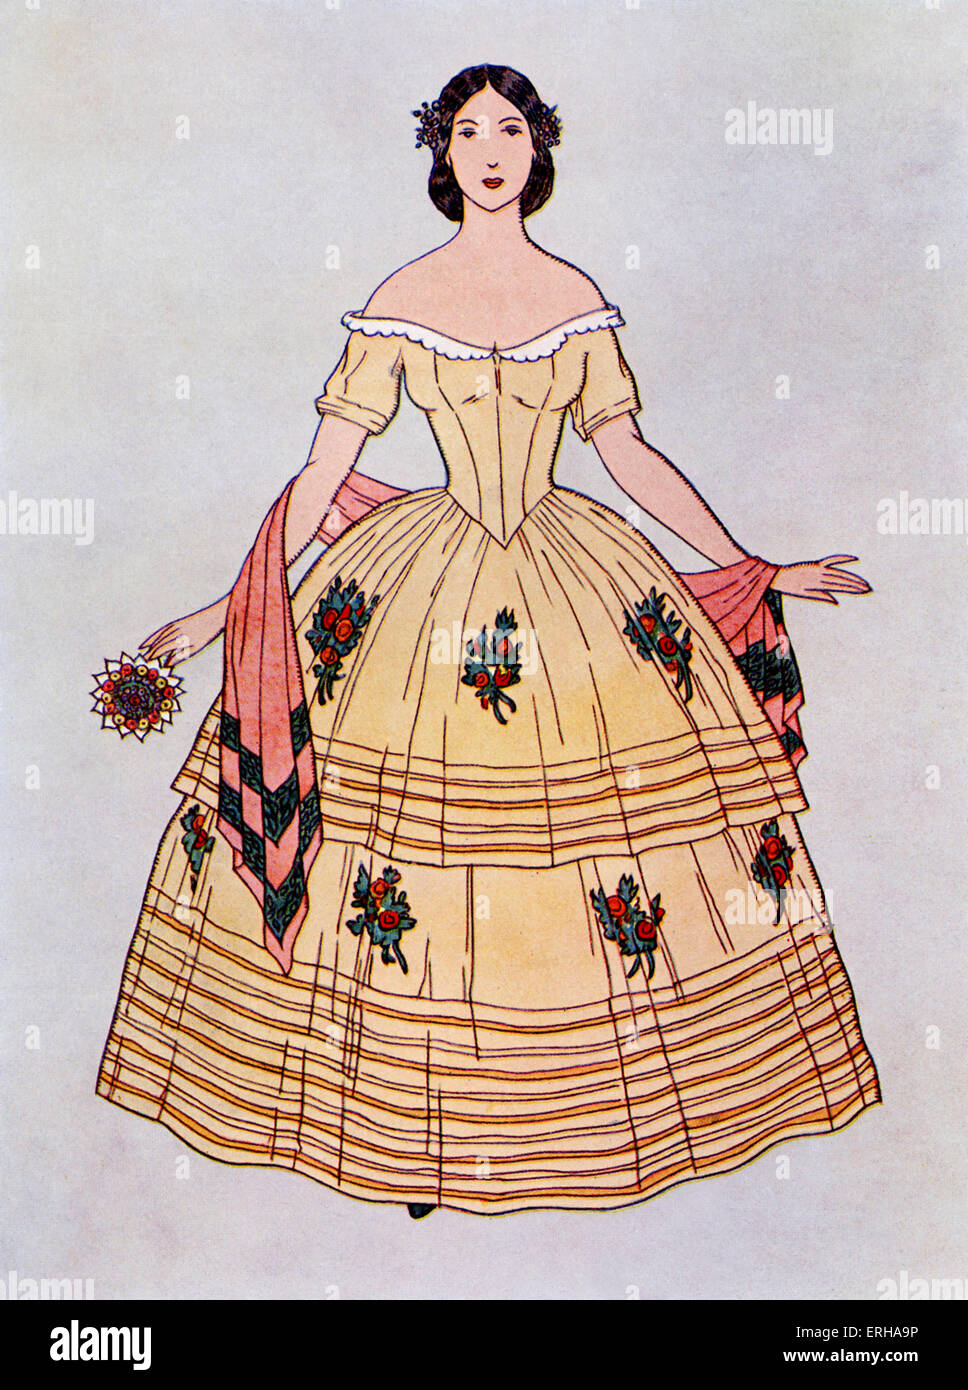 Lady wearing a ball dress, c.1860. In this style the skirt was in a deux jupes (two parts), decorated with flowers with a narrow white edging around the top. Stock Photo